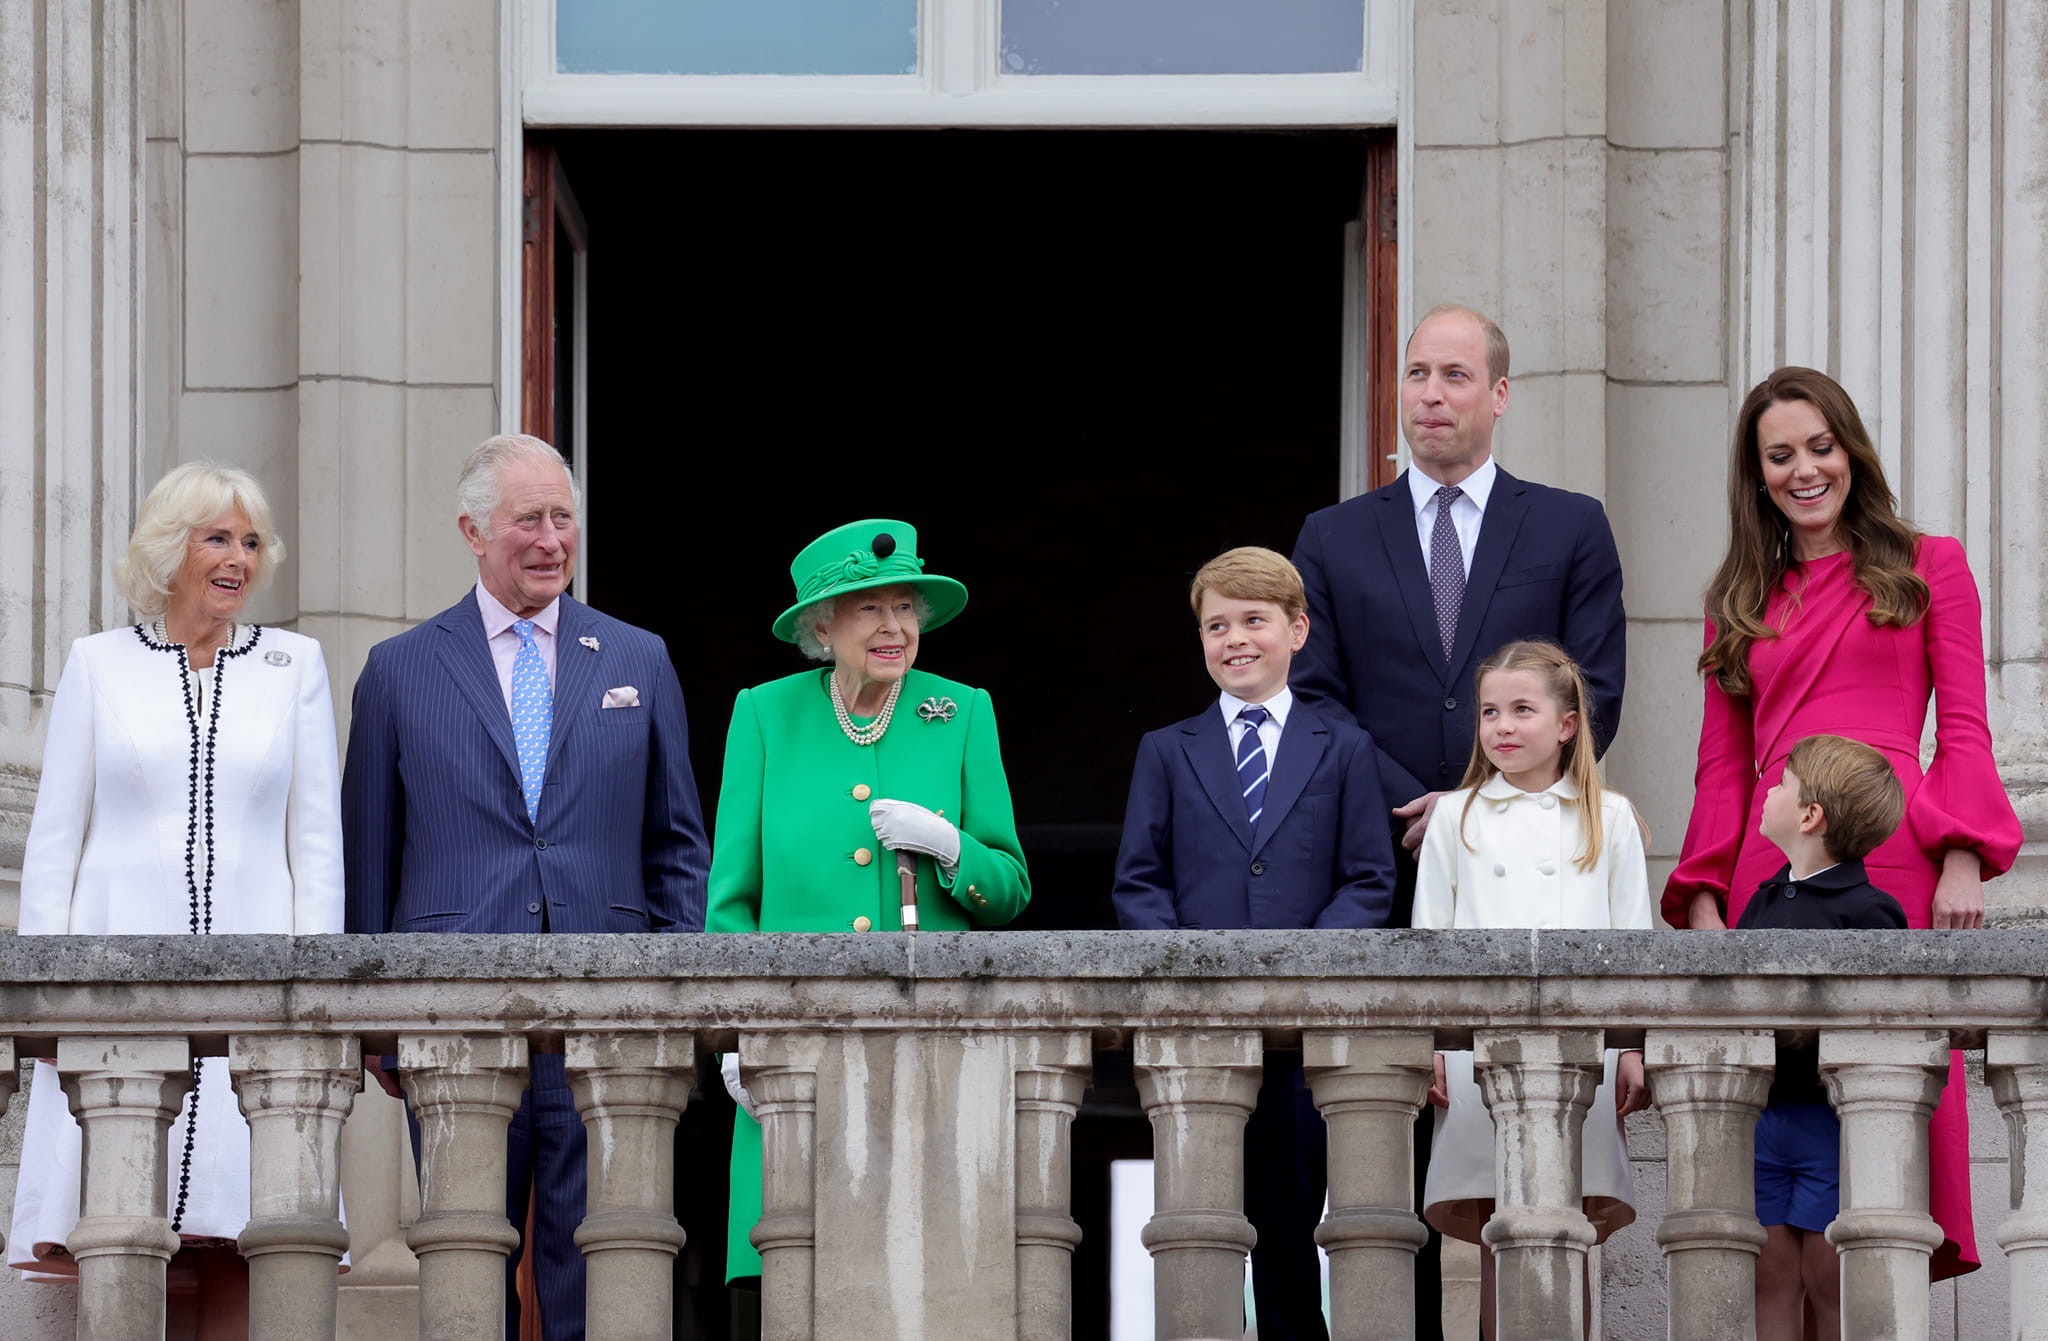 The Royal Family at Buckingham Palace for the Platinum Jubilee Celebration